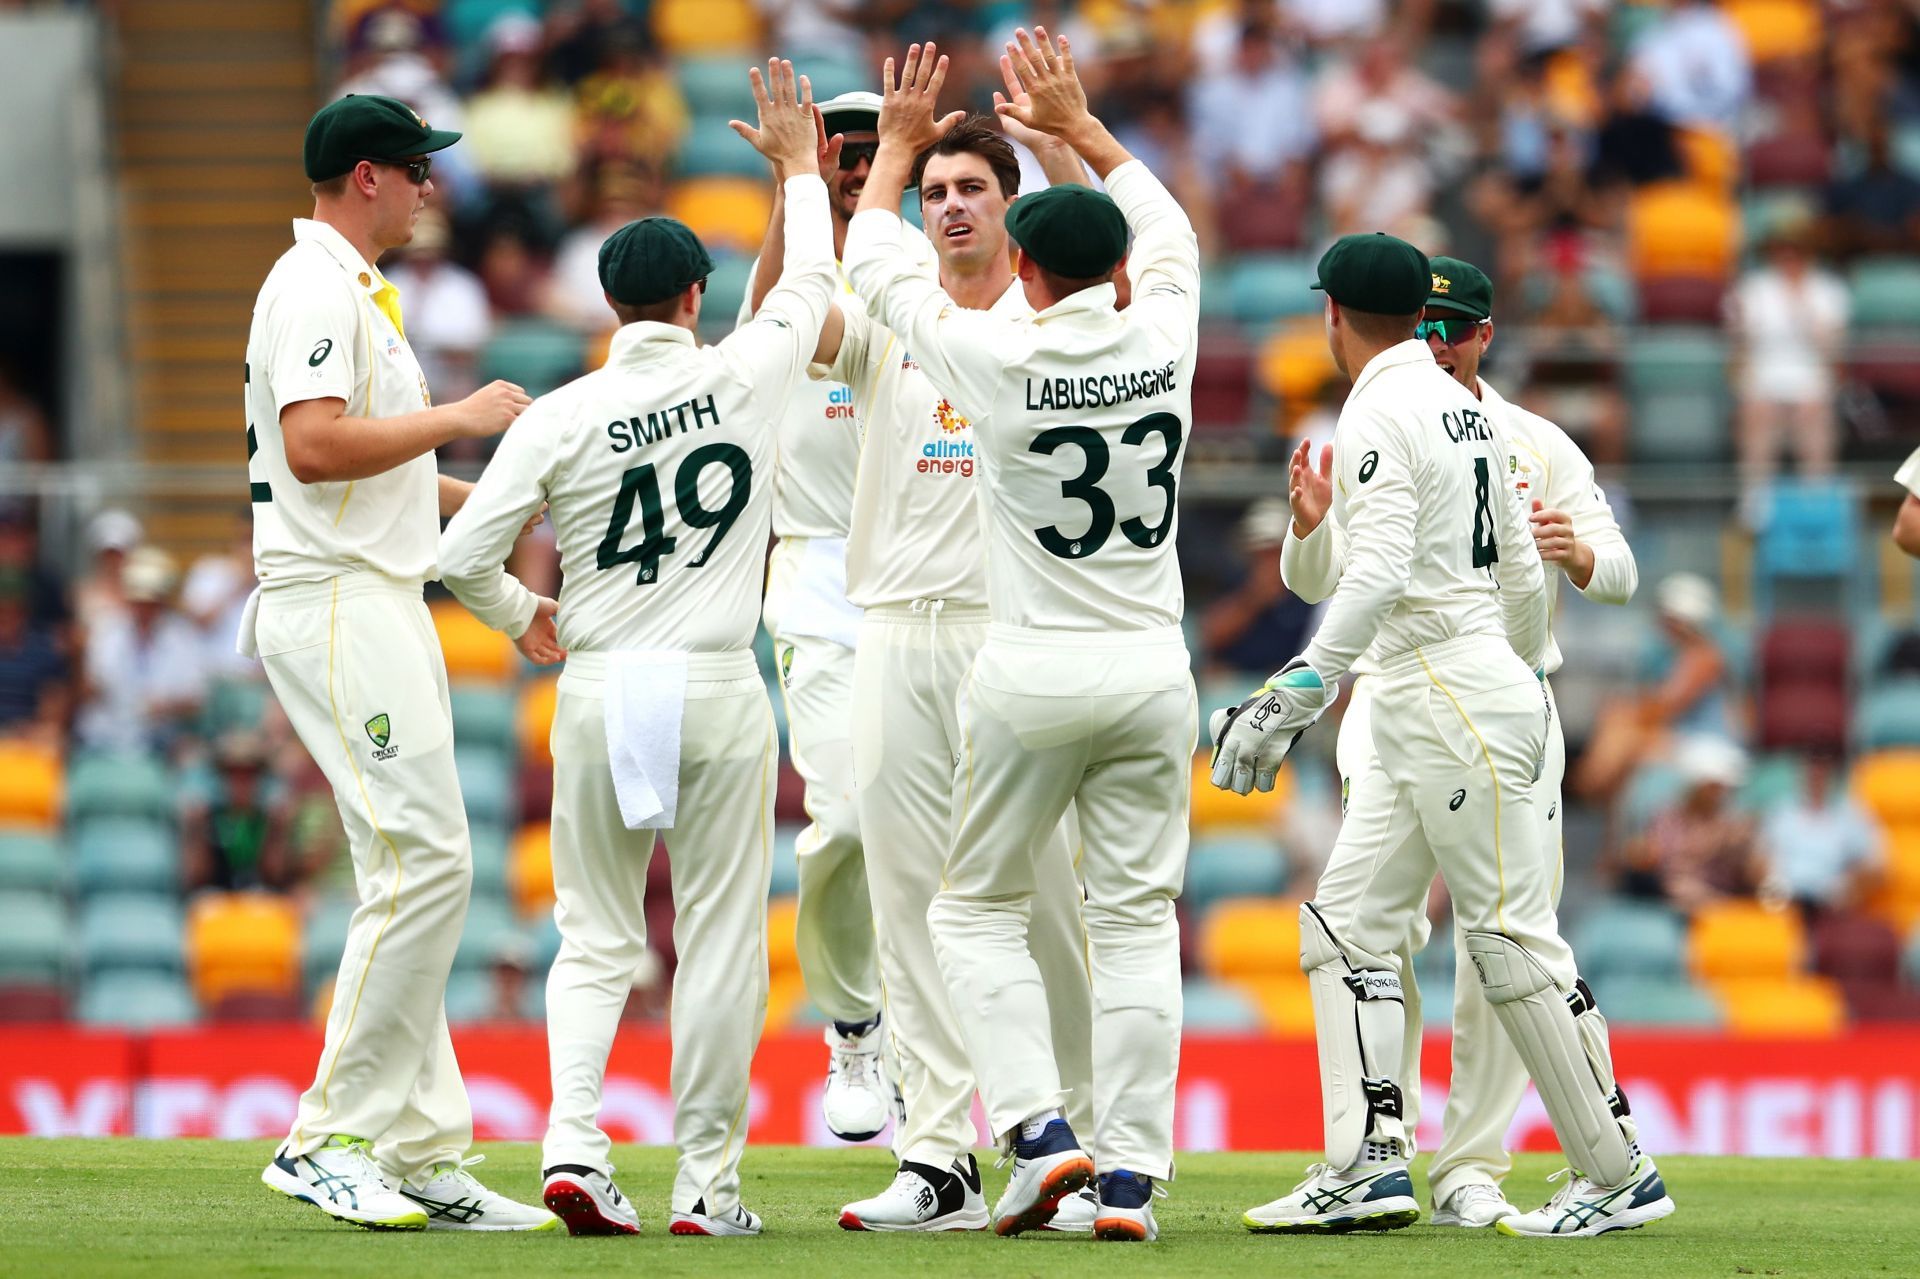 Pat Cummins celebrates with his team after taking the wicket of Rory Burns. Pic: Getty Images